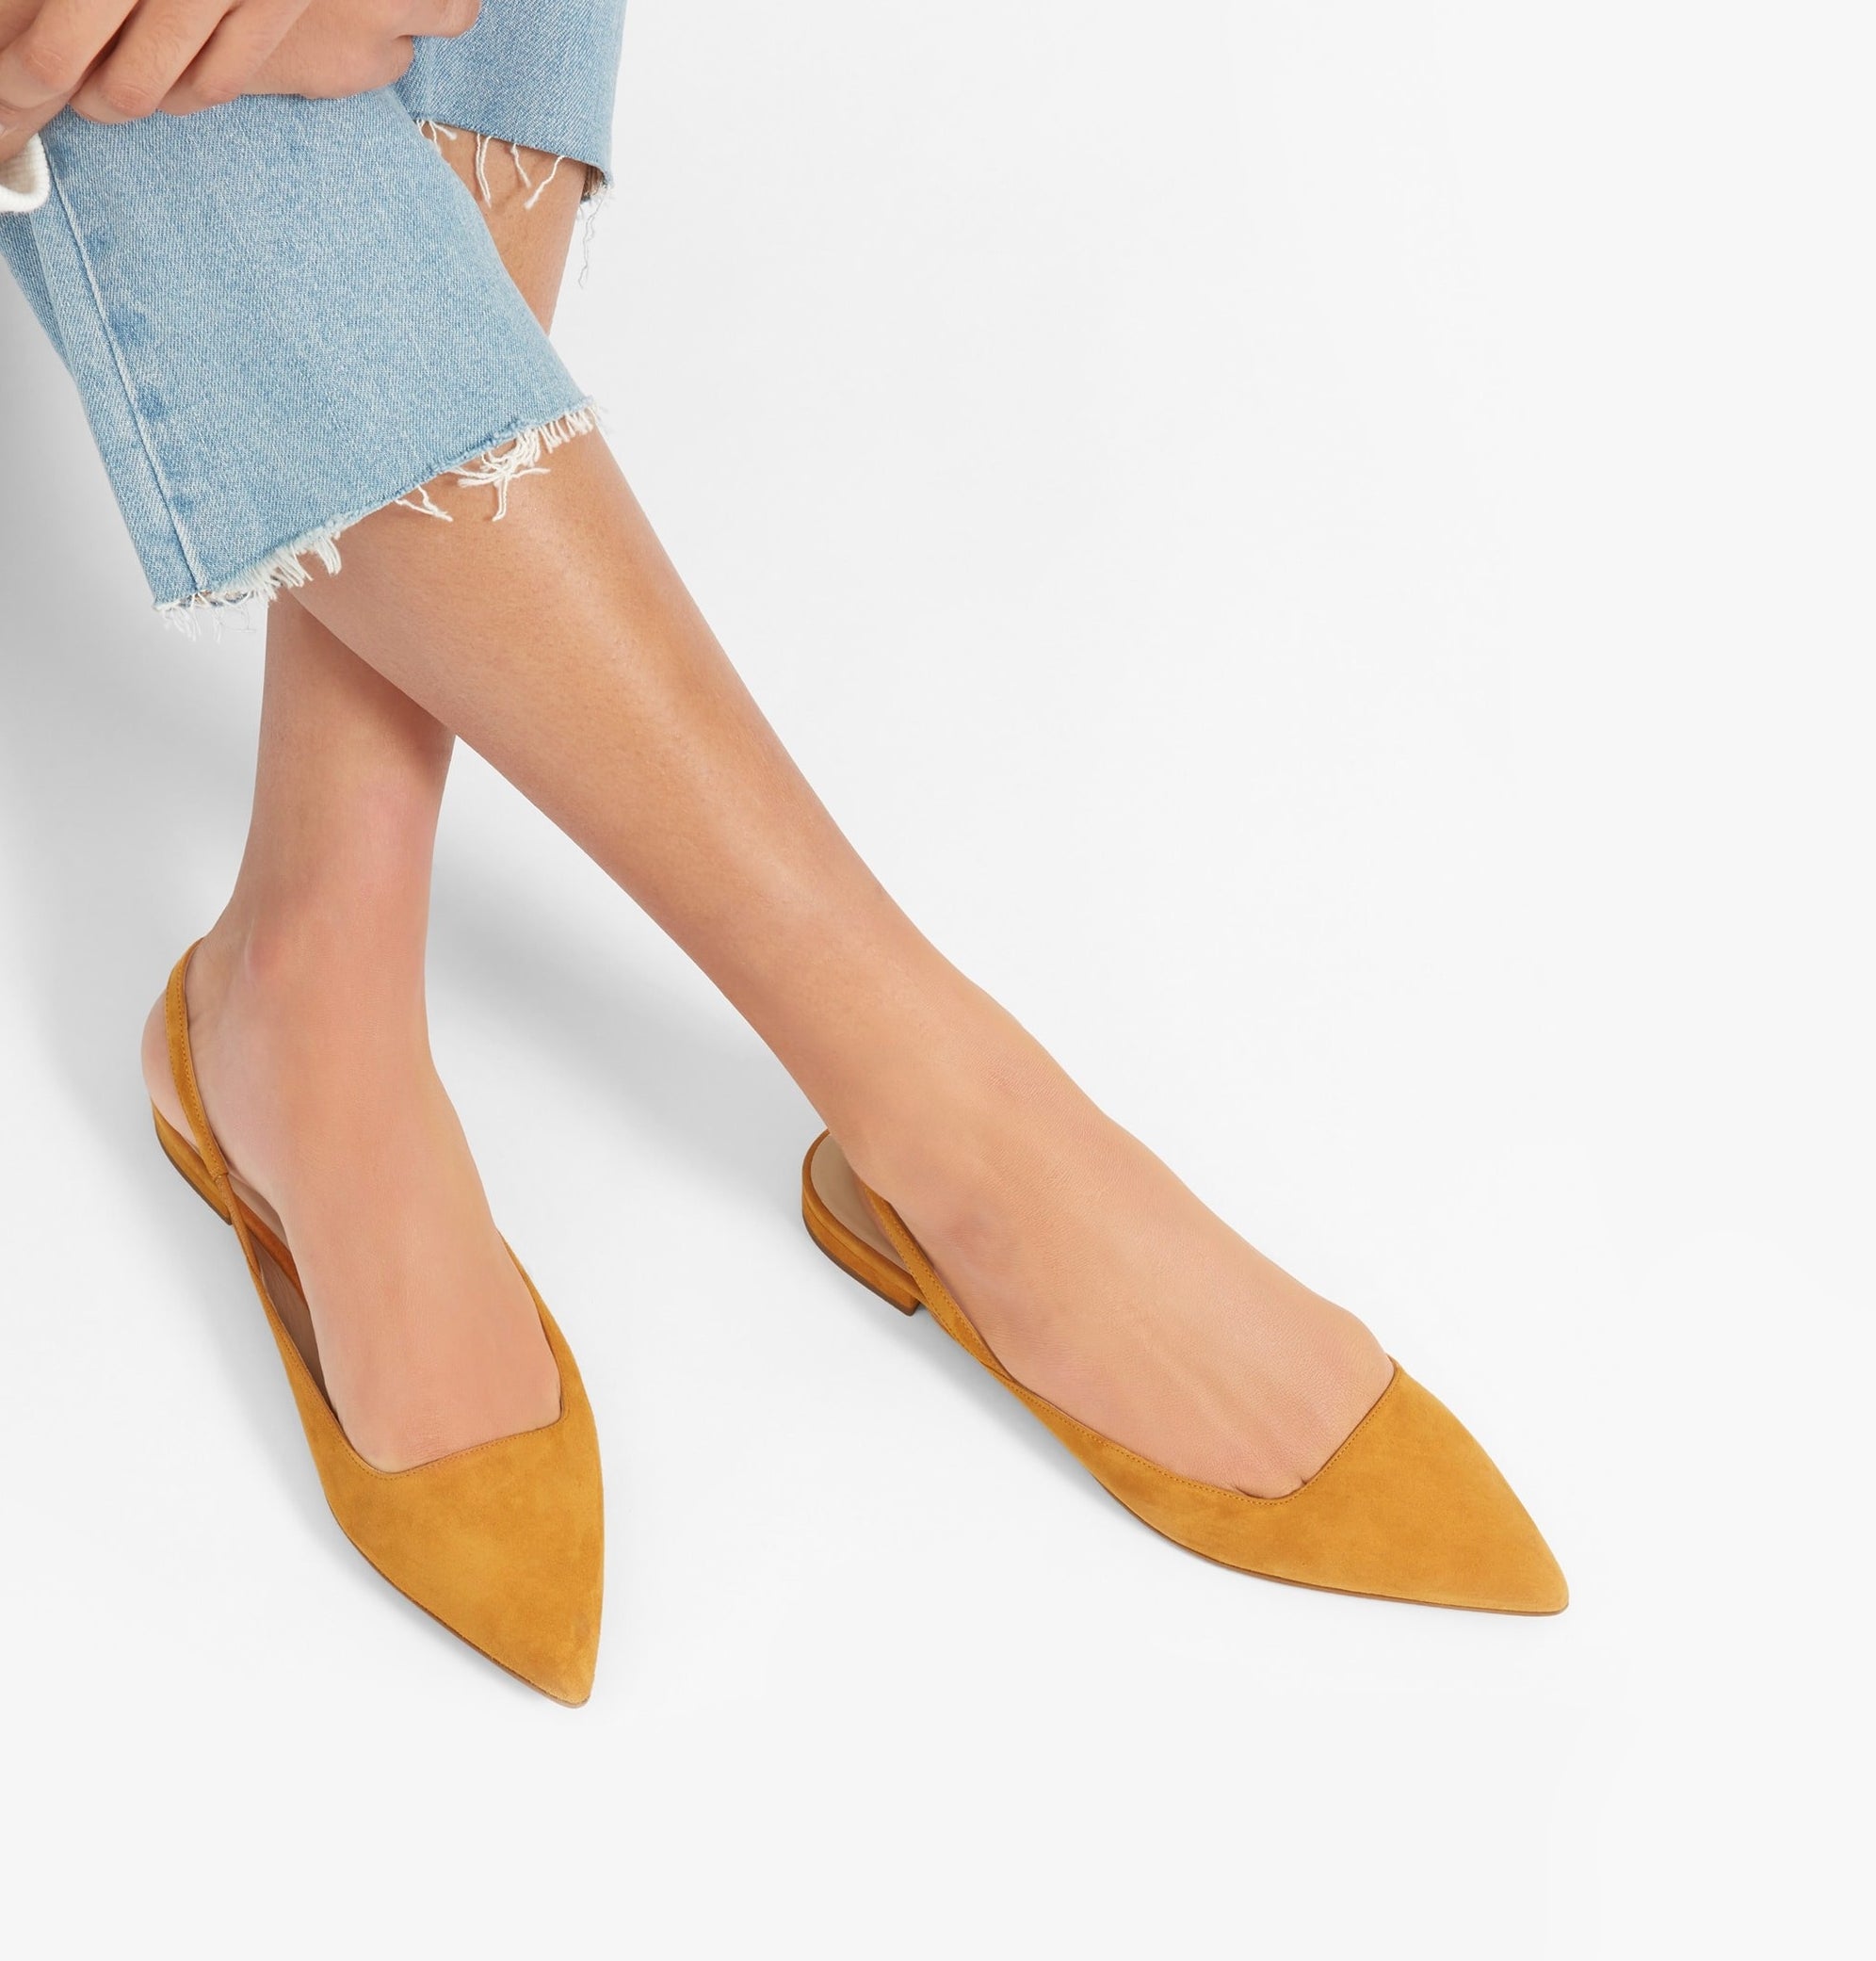 30 Pairs Of Shoes That Are Definitely Worth The Splurge